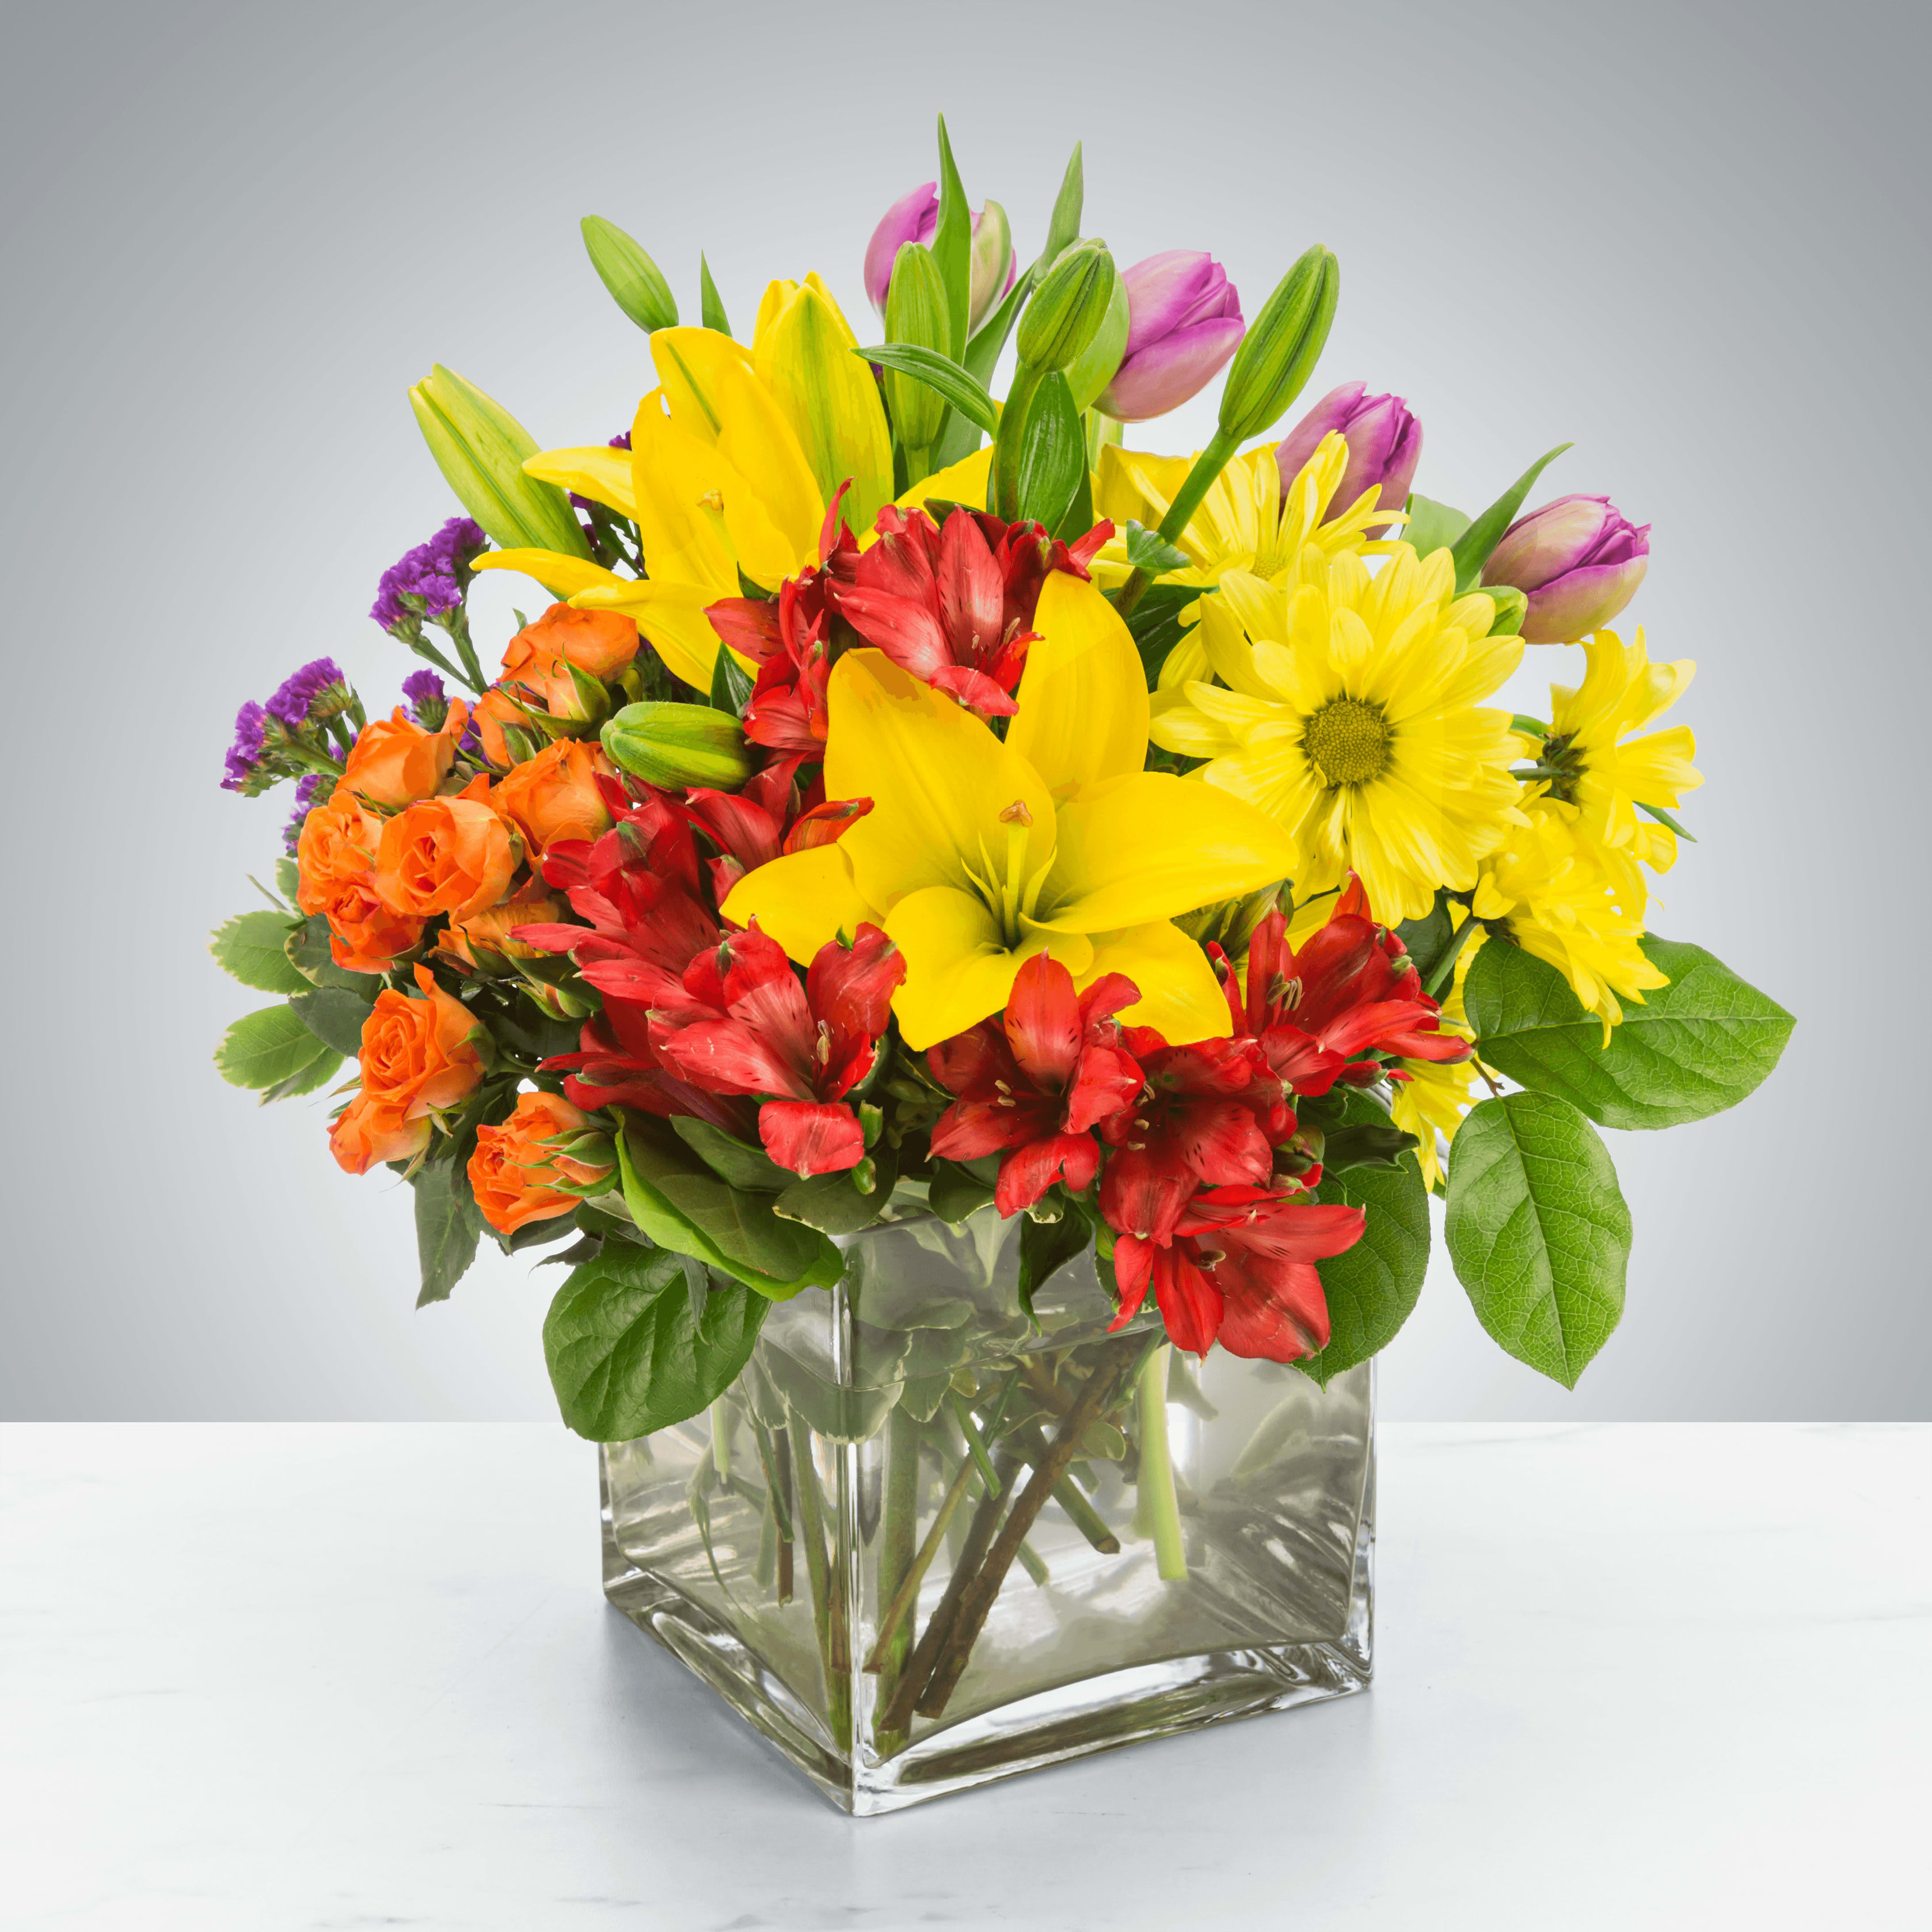 Juicy by BloomNation™ - Juicy by BloomNation™ packs a color punch! Featuring over 6 different flowers and greens, all in different colors, this arrangement is a great option for sending to co-workers, friends, or clients. Make a brightly colored splash.  Approximate Dimensions: 11&quot;D x 11&quot;H